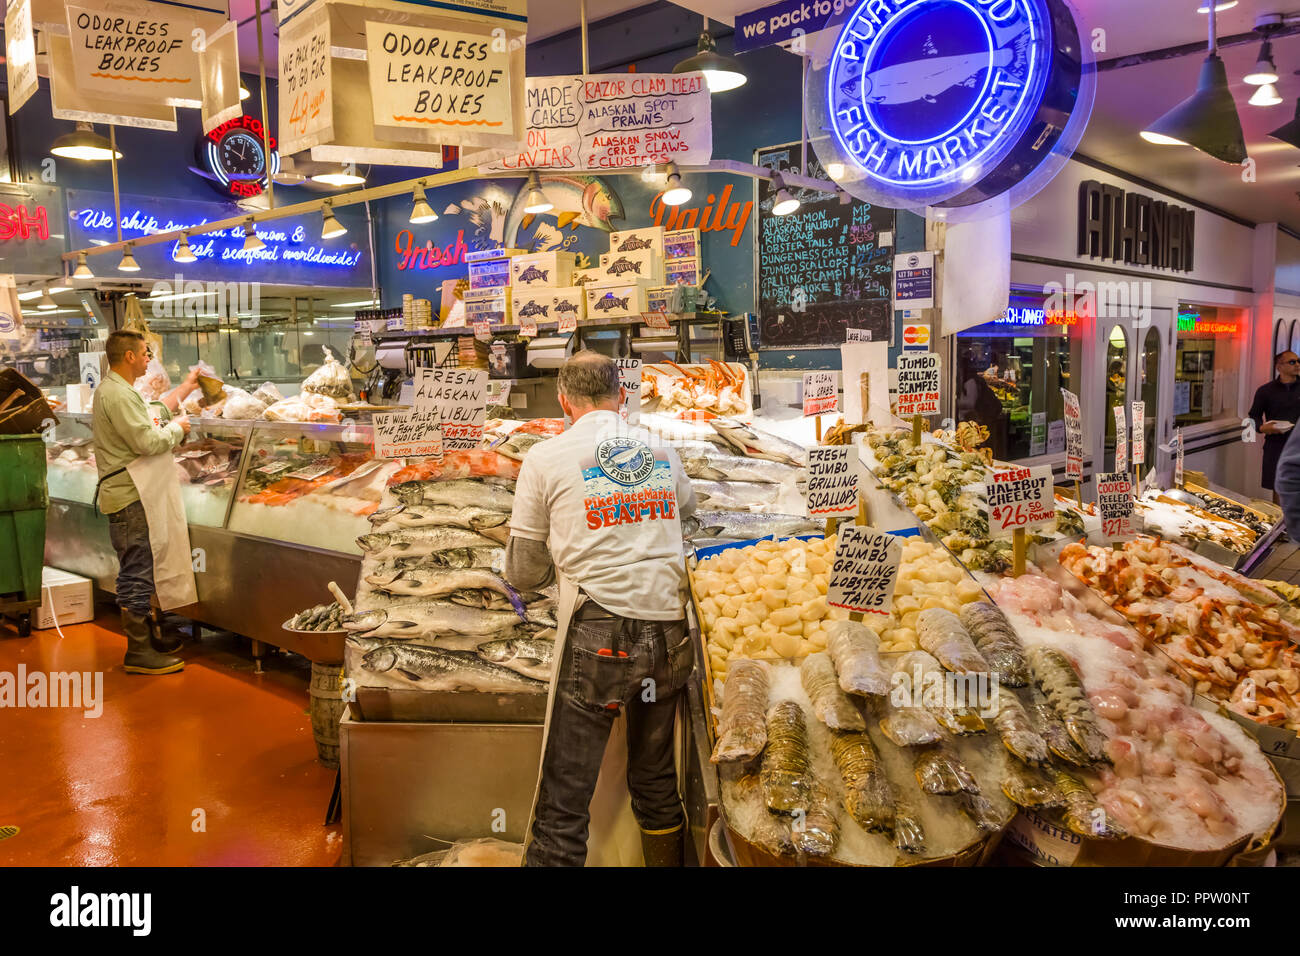 Pike Place Market in Seattle Washington one of the oldest continuously operated public farmers' markets in the United States Stock Photo